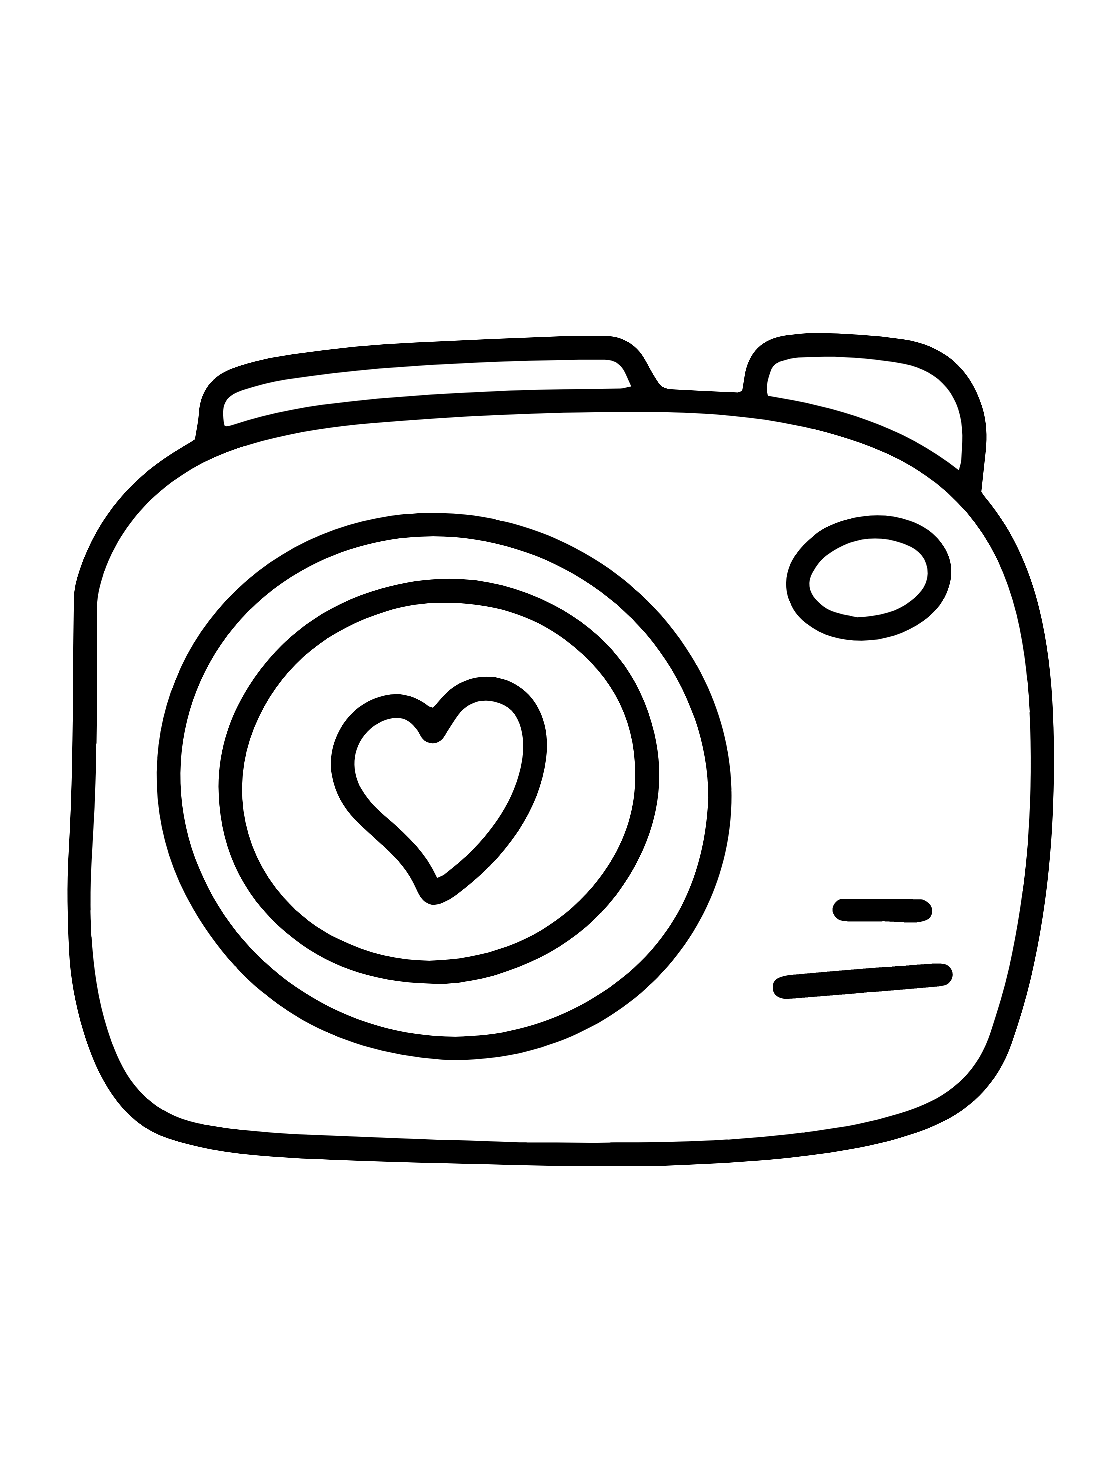 Sweet Camera Printable Coloring Pages